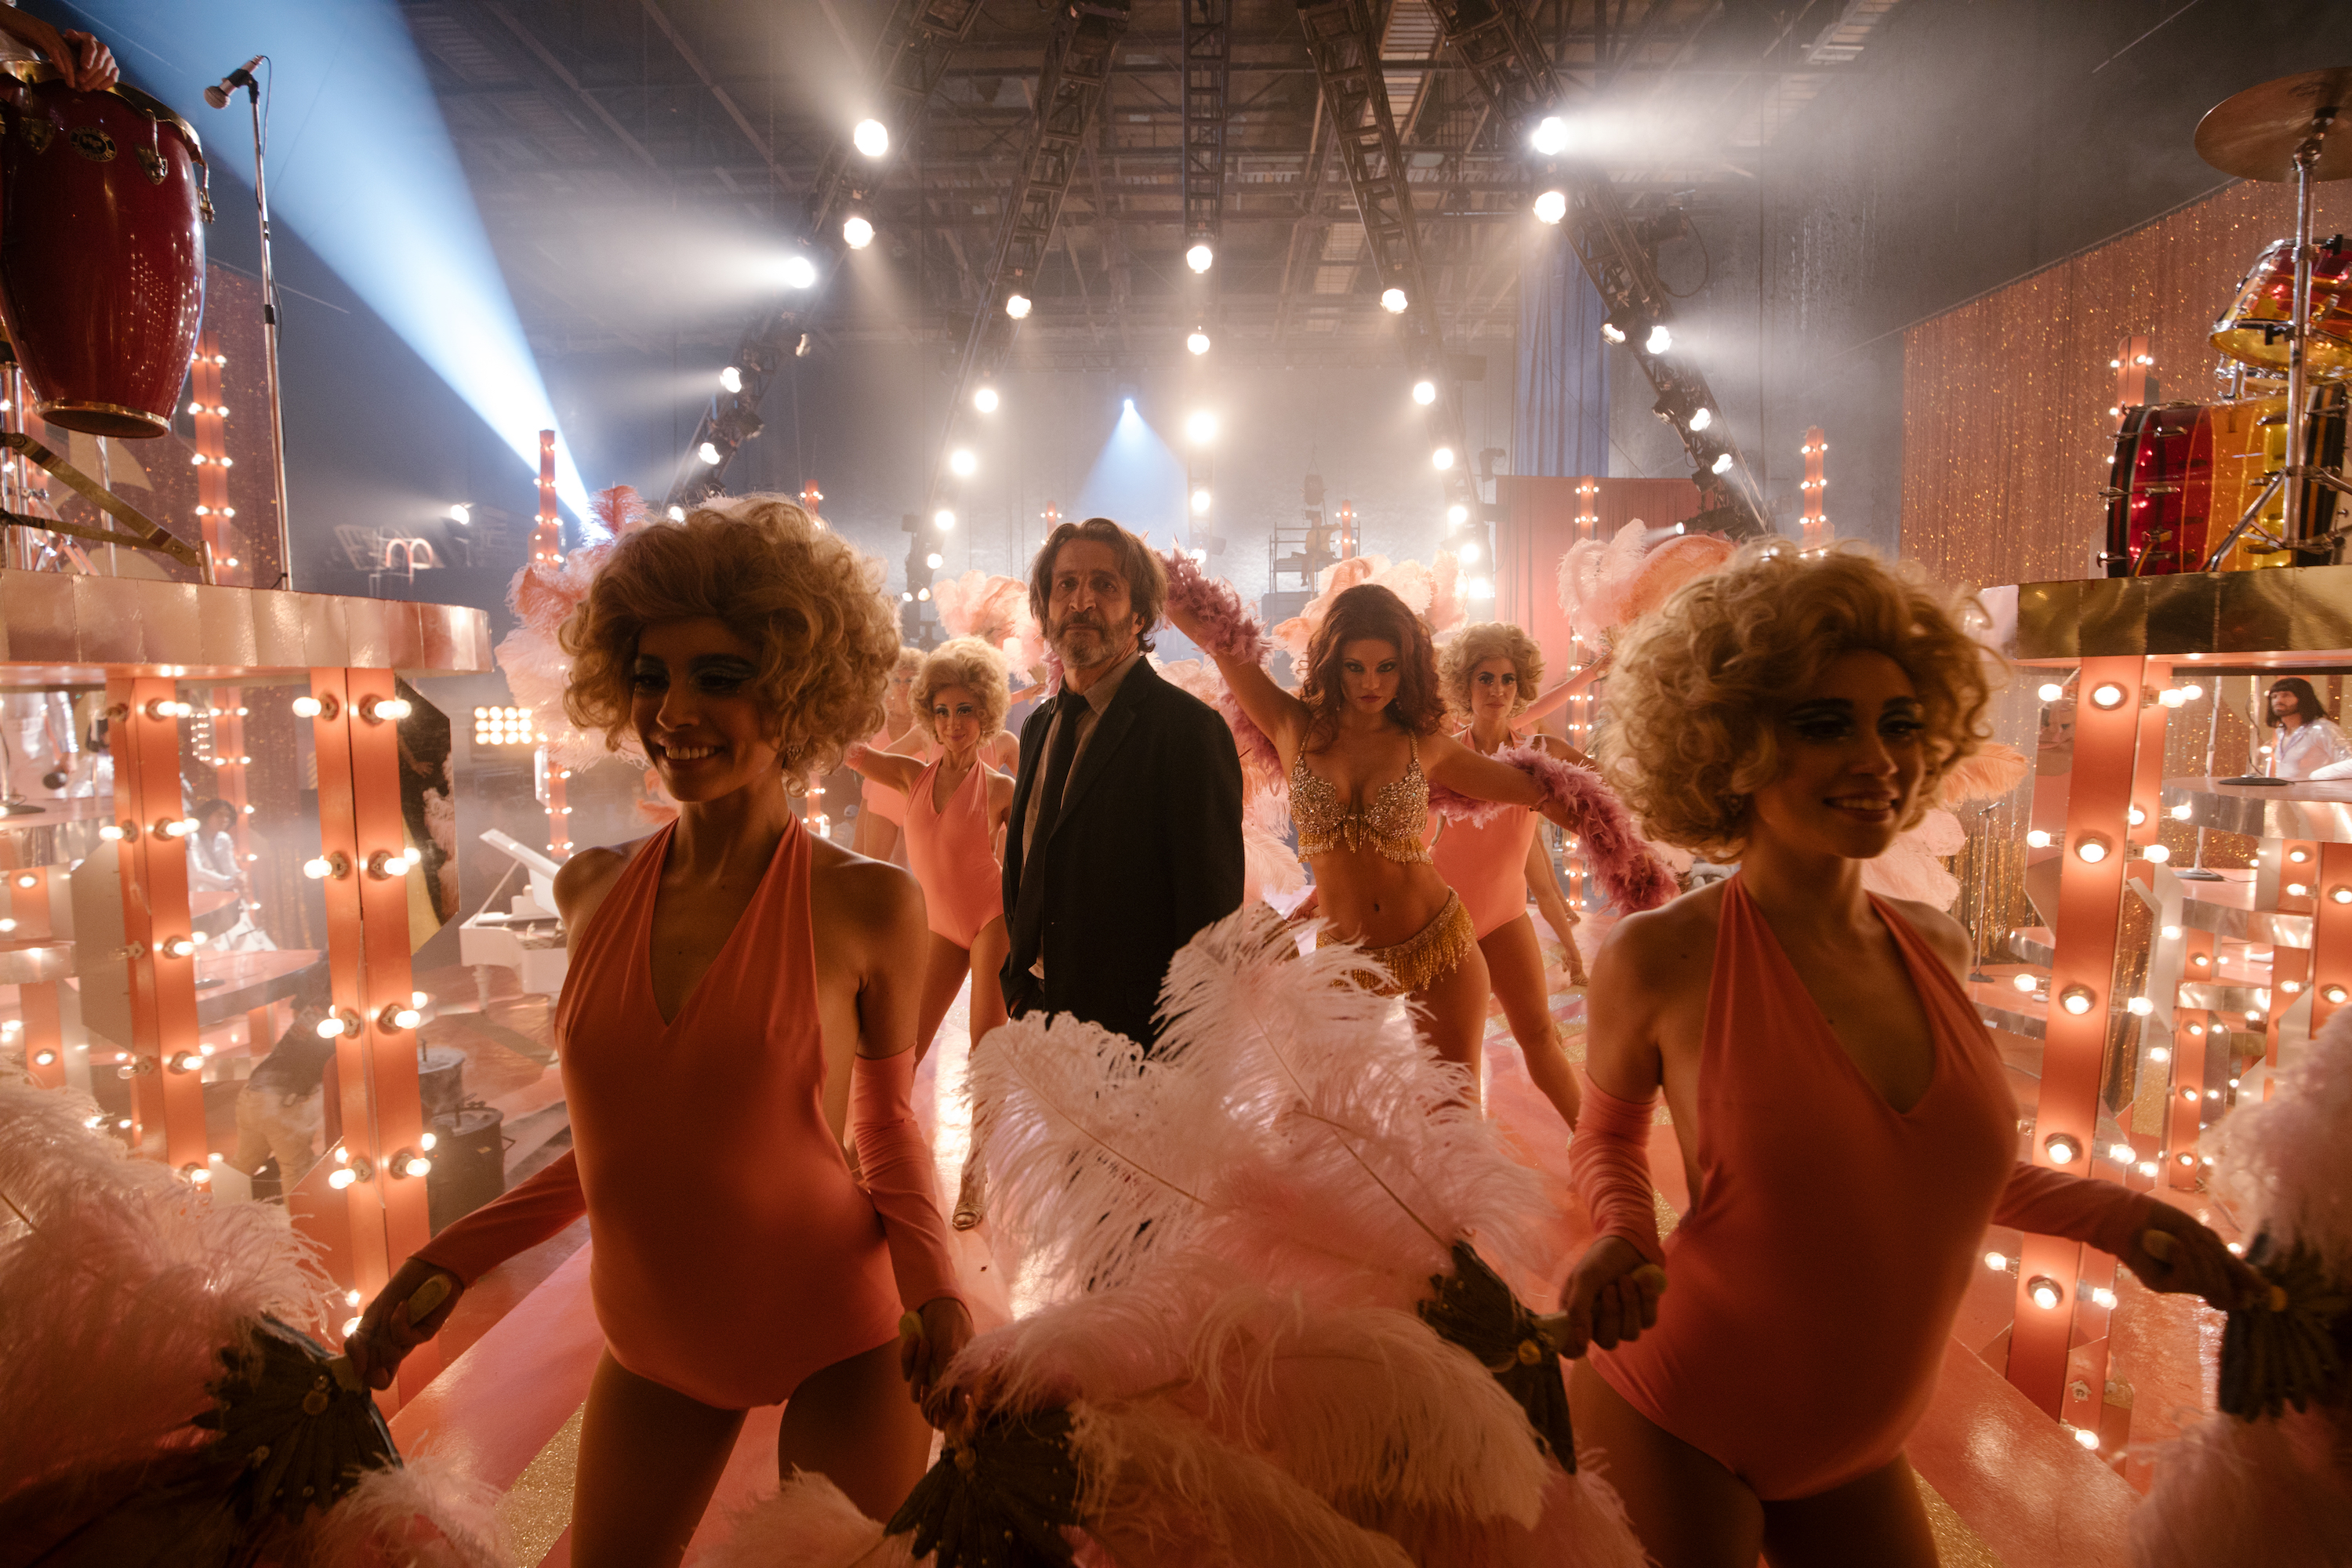 Silverio (Daniel Gimènez Cacho), a salt-and-pepper-bearded man in a plain black suit, stands in the middle of a visual cacophony of dressing-room mirrors and lights, overheard banks of spotlights, and showgirls in blonde curly wigs and peach leotards in a scene from Bardo: A False Chronicle of a Handful of Truths